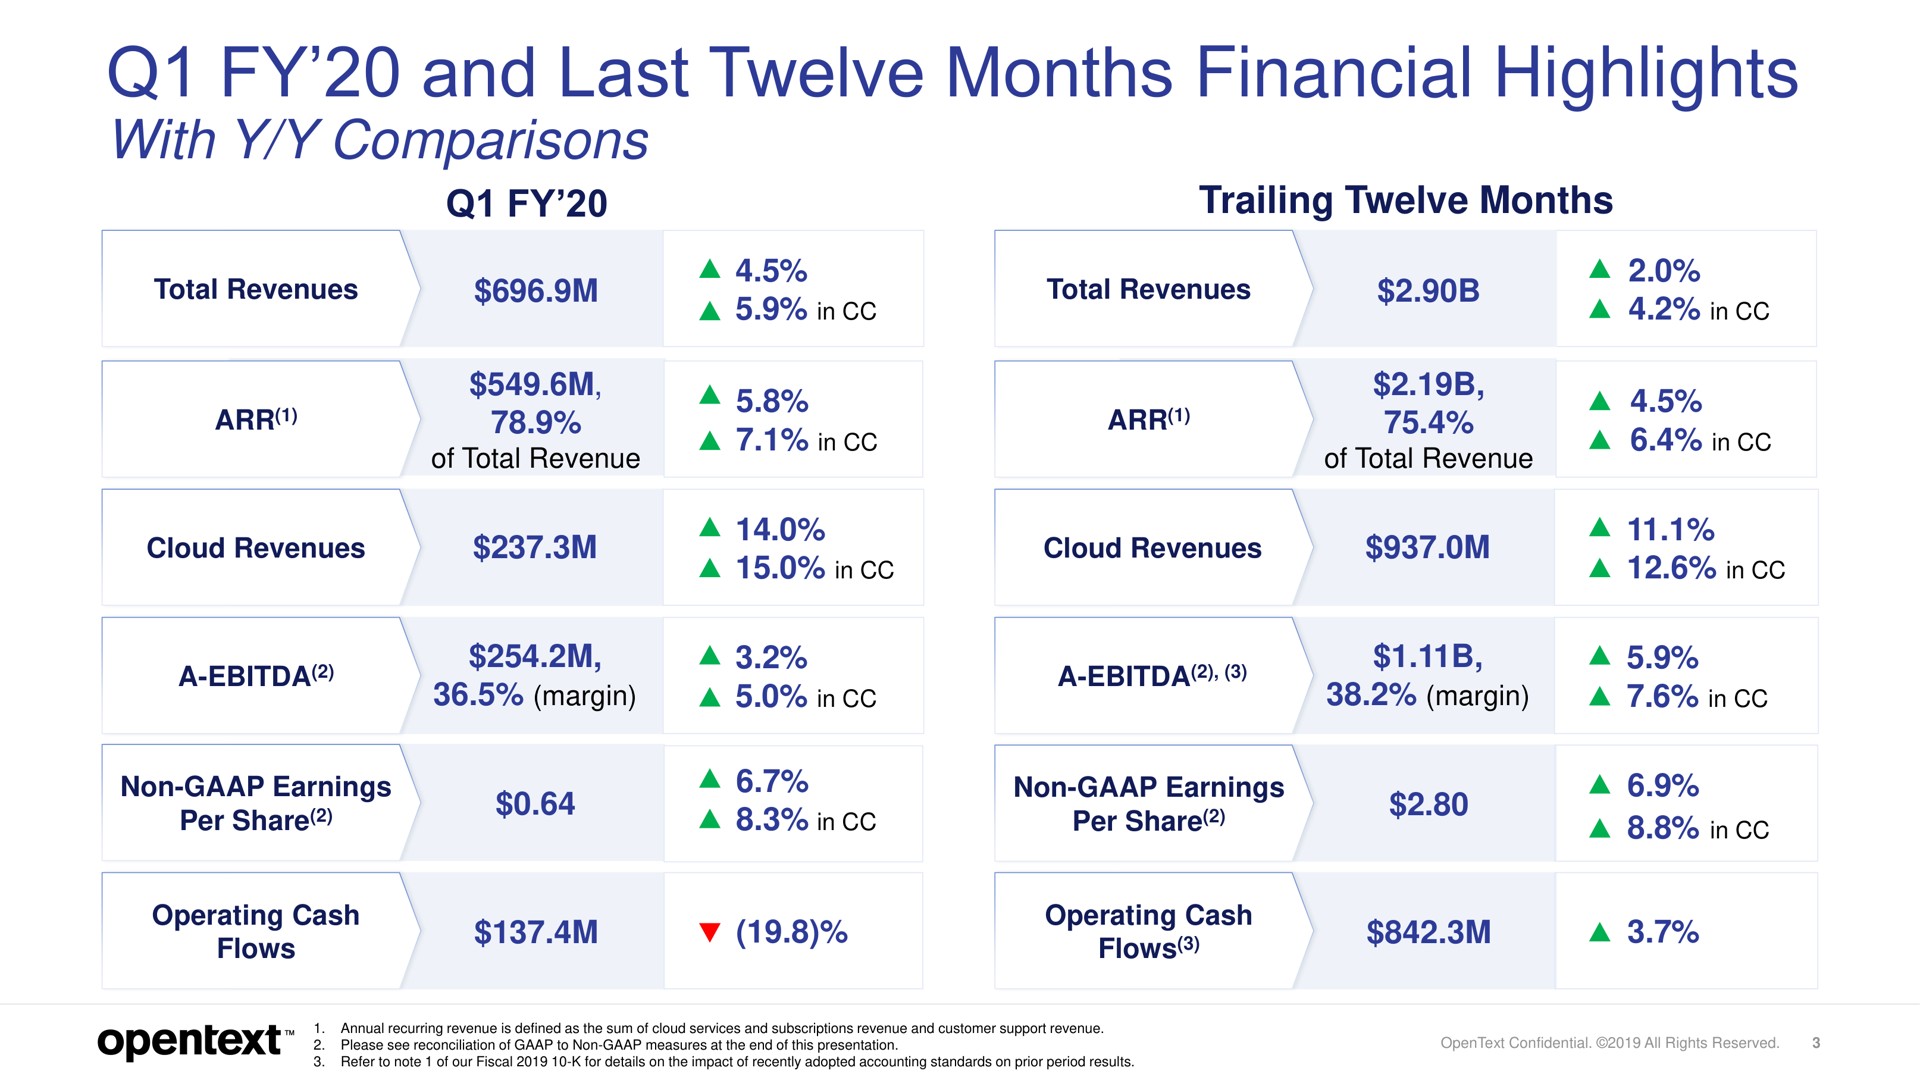 and last twelve months financial highlights with comparisons | OpenText